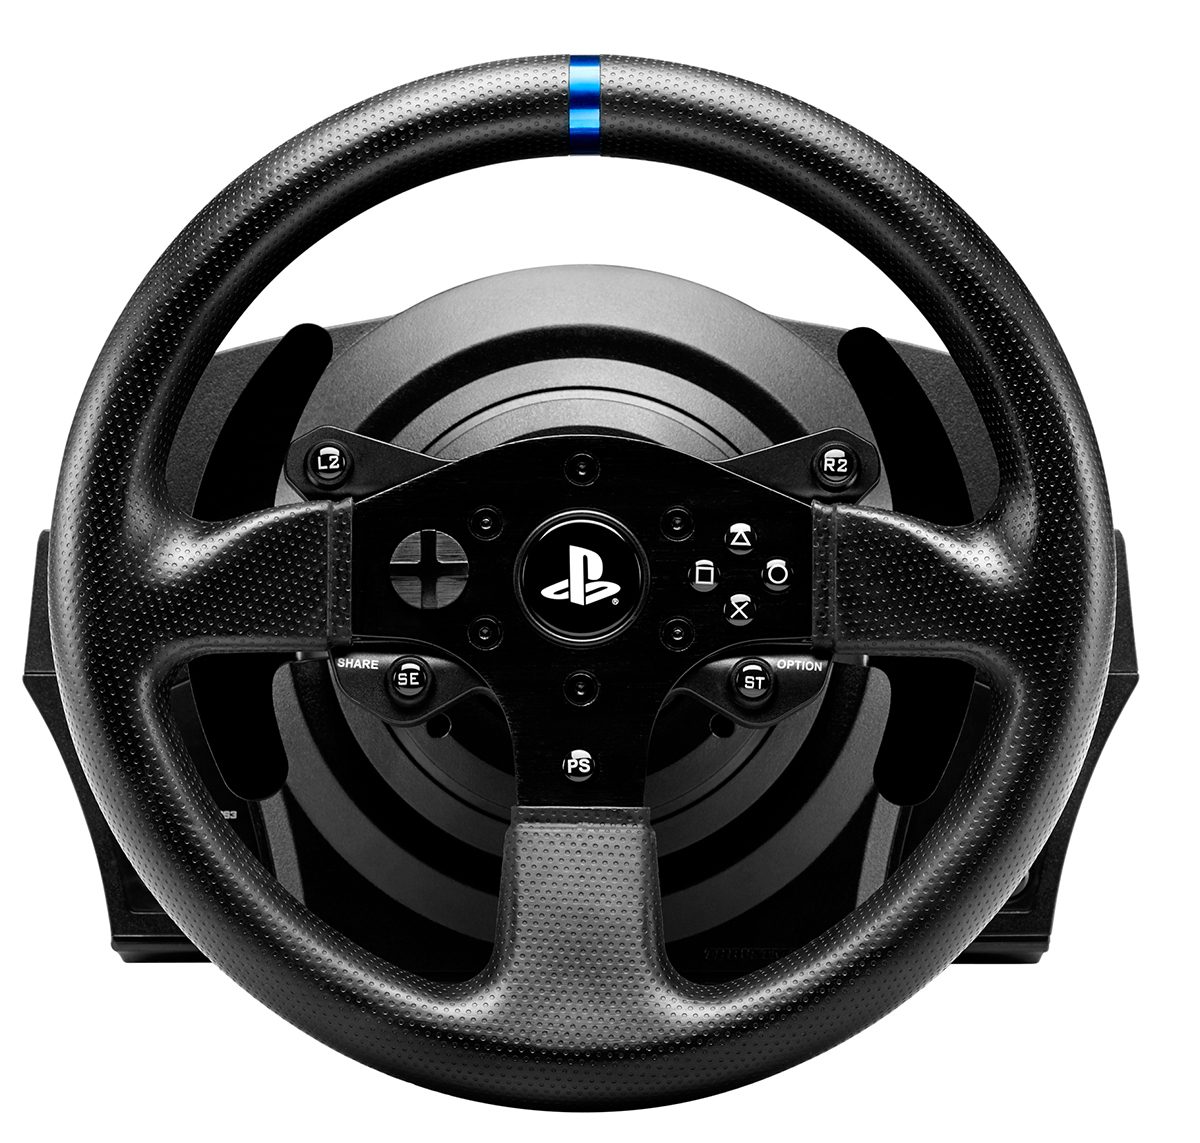 Thrustmaster T300 RS - Review [After 1 Year] 